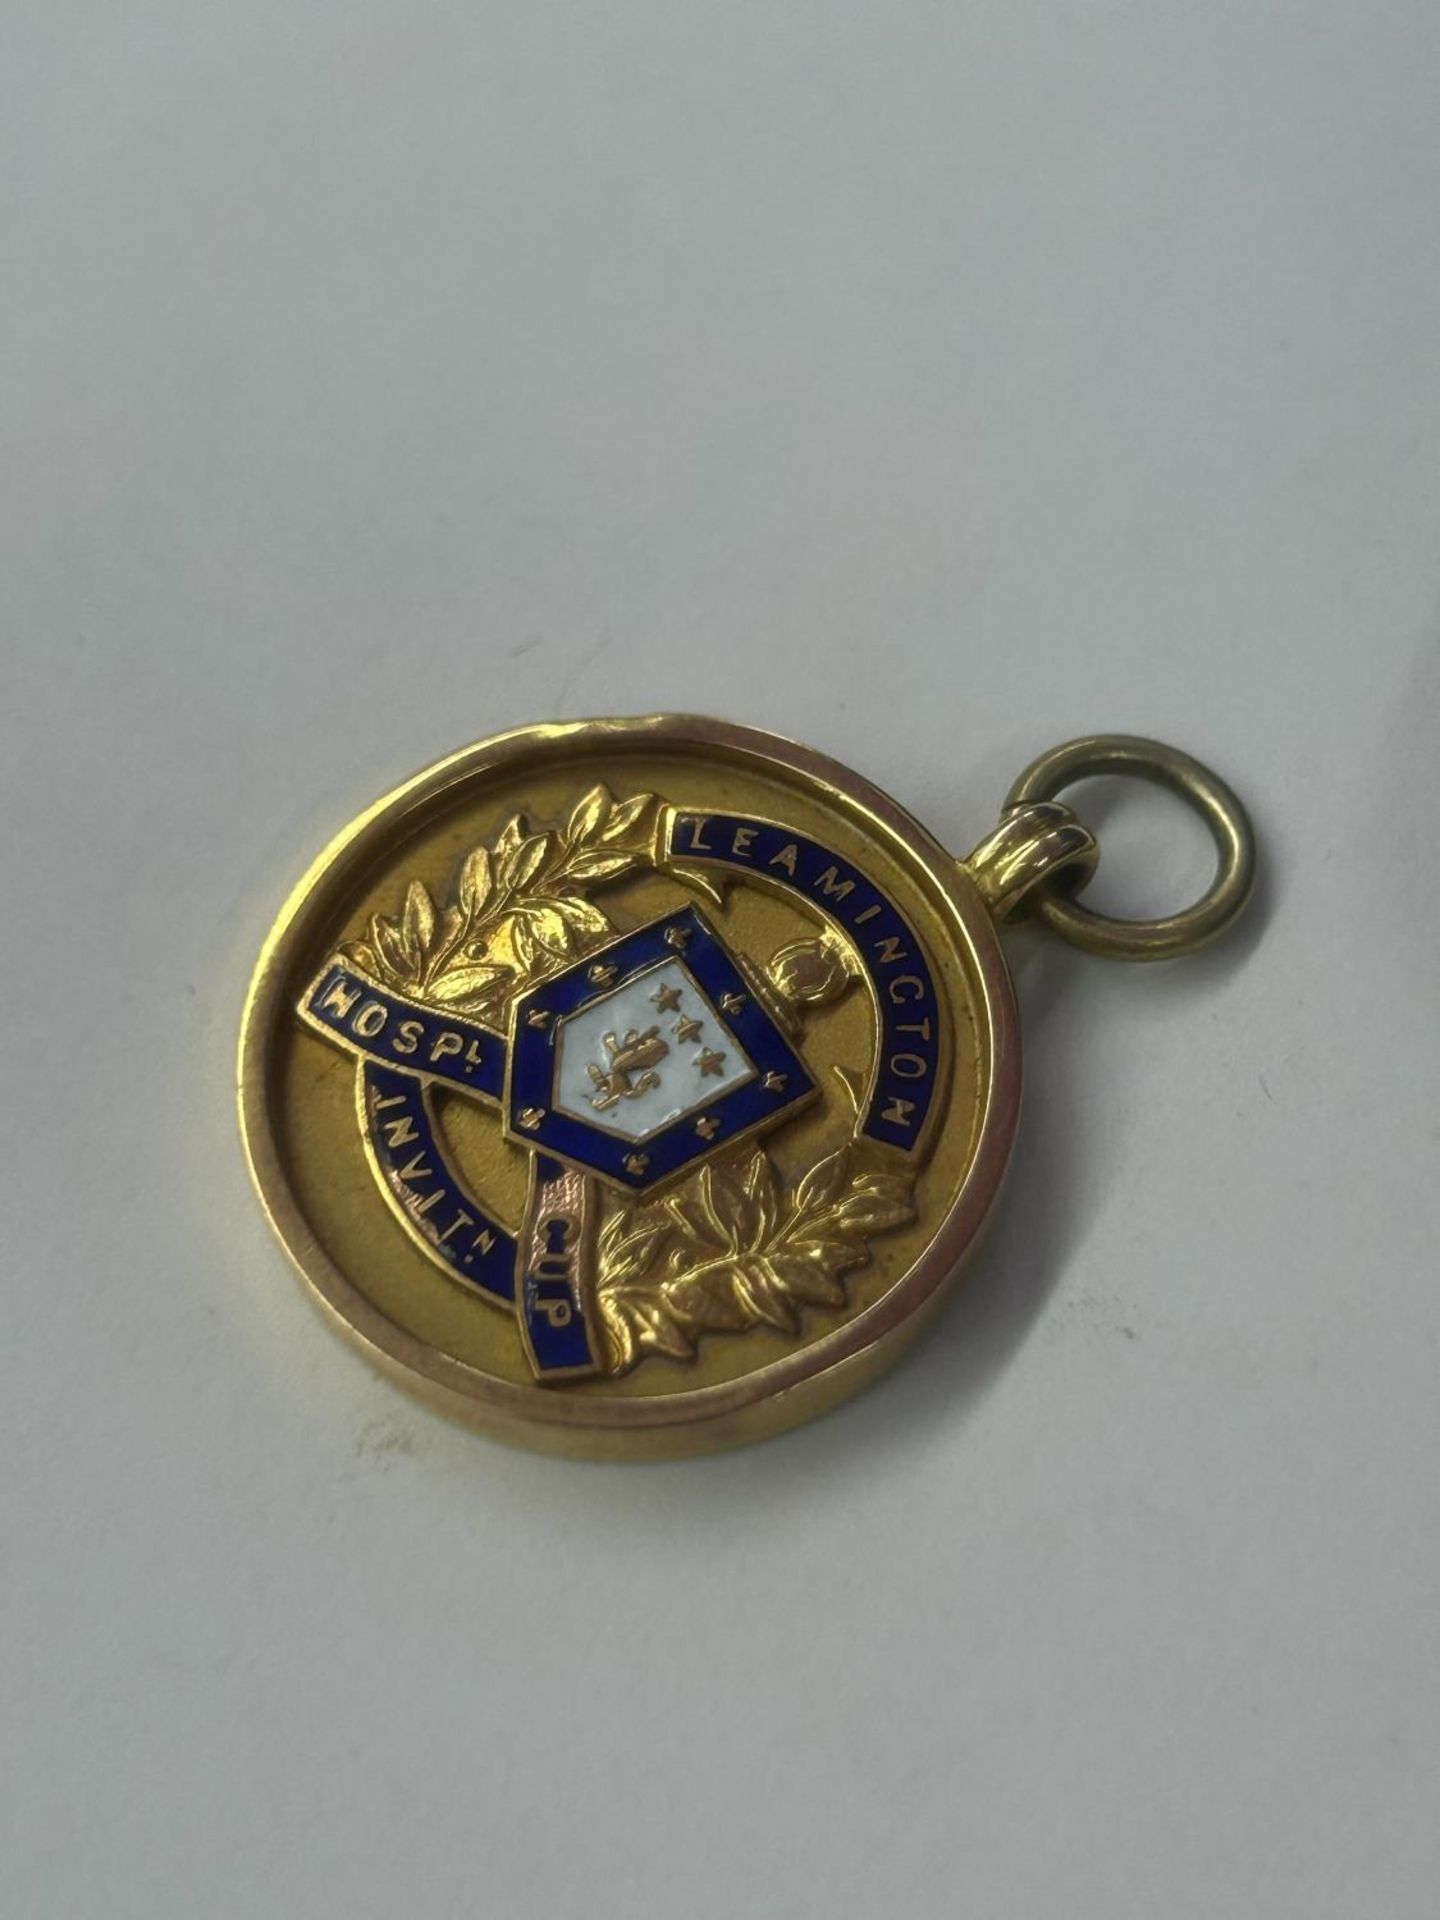 A HALLMARKED 9 CARAT GOLD & ENAMEL LEAMINGTON HOSPITALITY CUP WINNERS MEDAL 1936-1937 SEASON, BY - Image 4 of 5